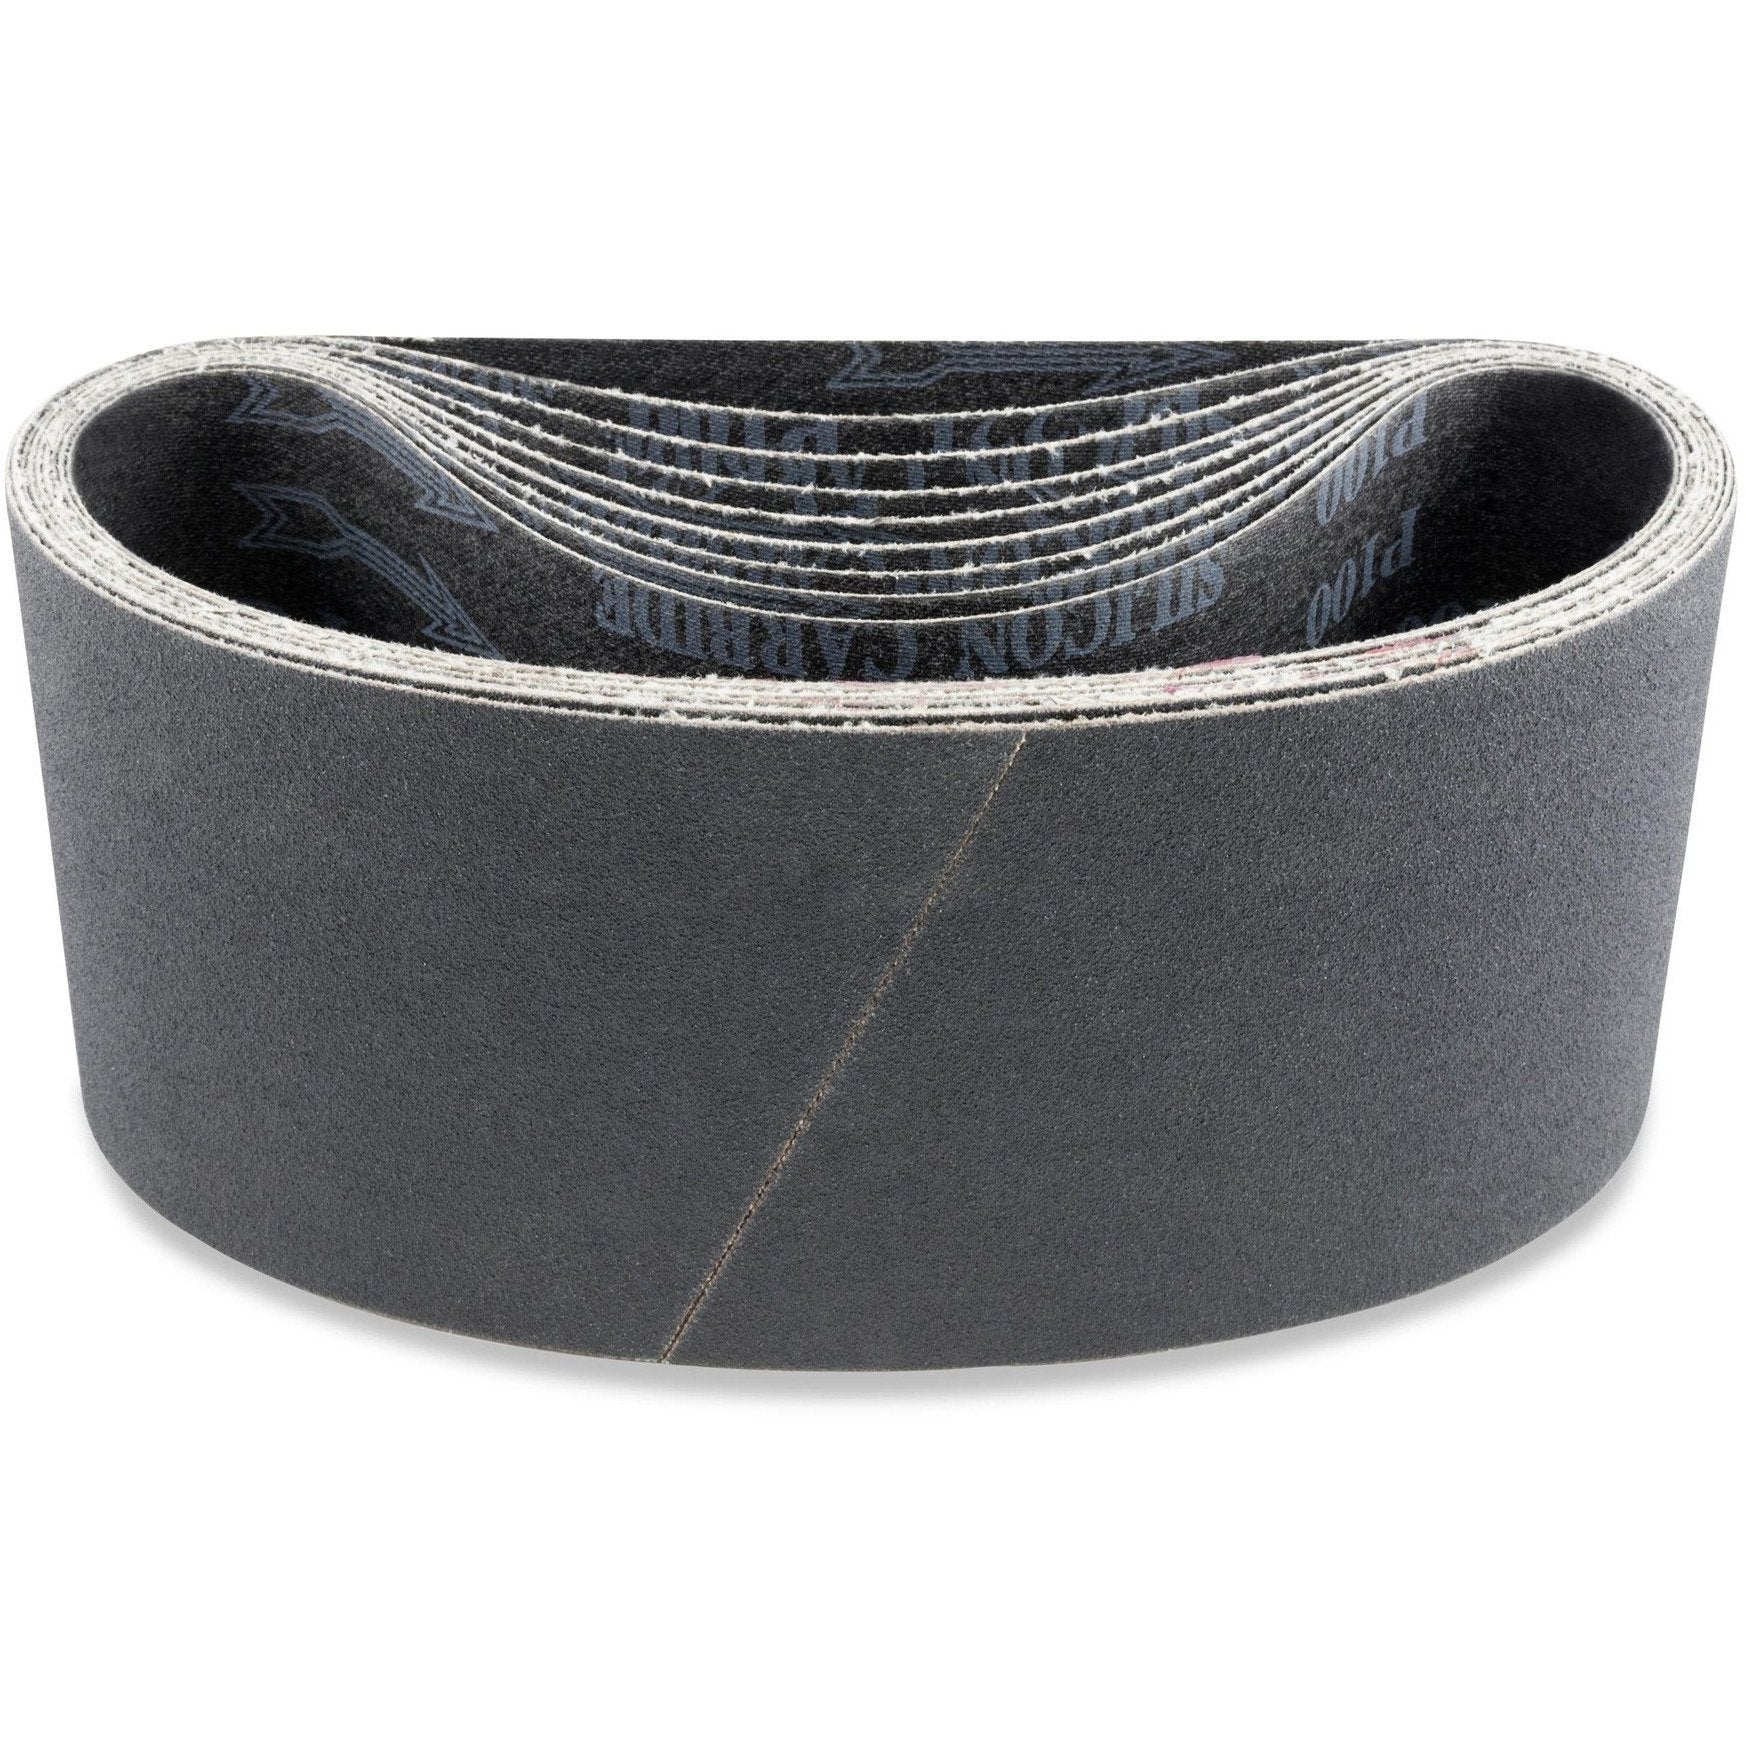 4 X 21 Inch Industrial Grade Silicon Carbide Sanding Belts, 3 Pack - Red Label Abrasives